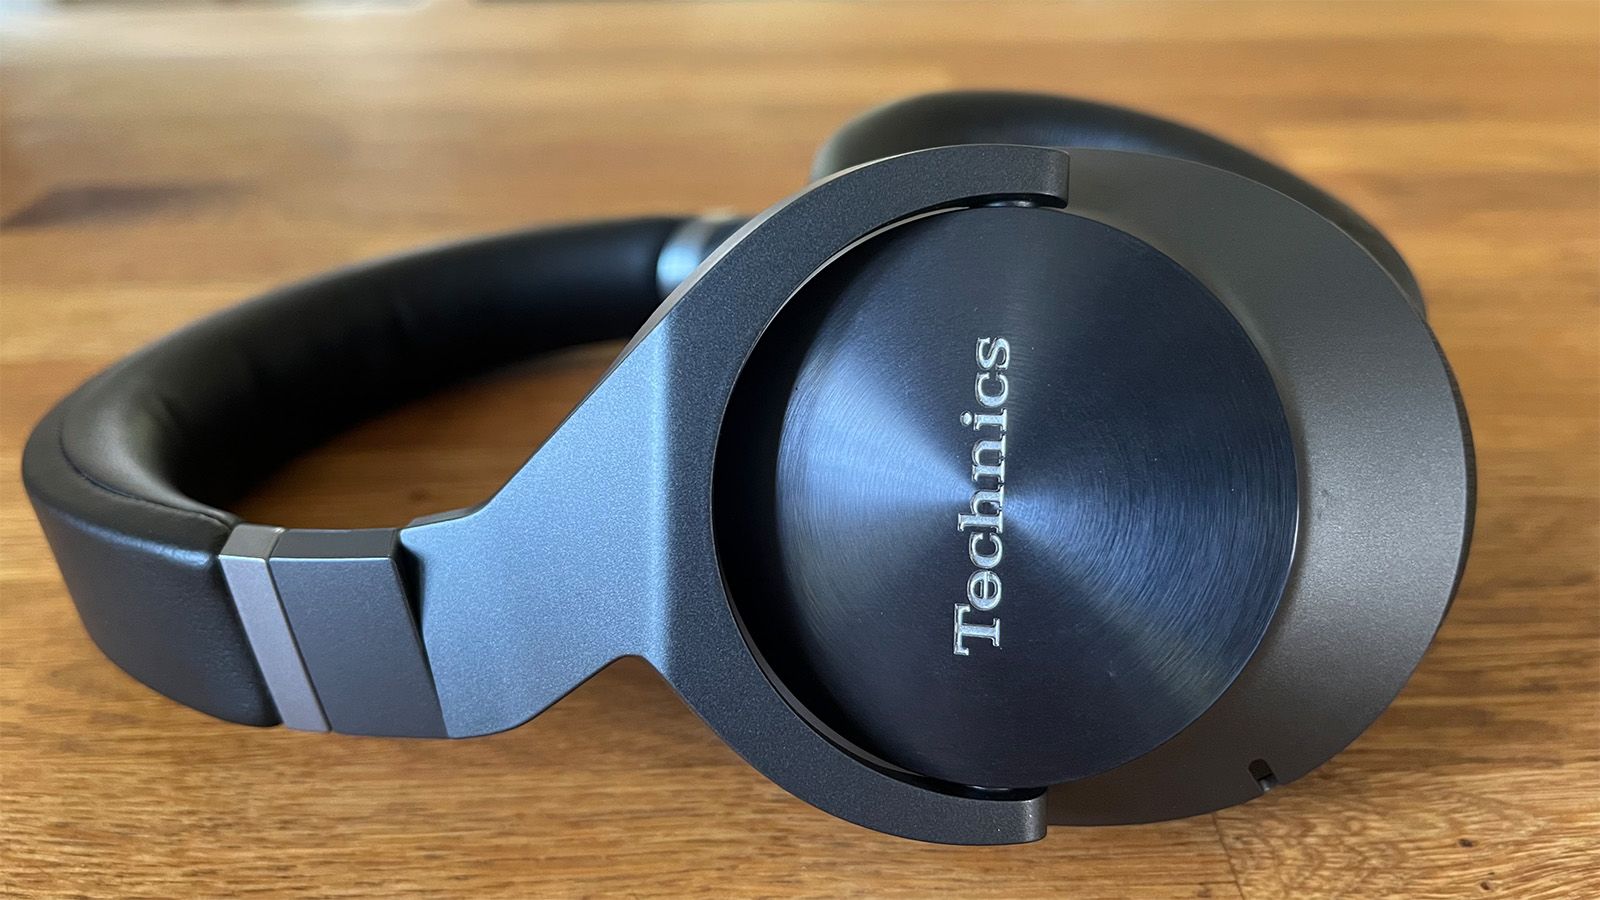 Technics EAH-A800 Review: Great Sound, Battery Life